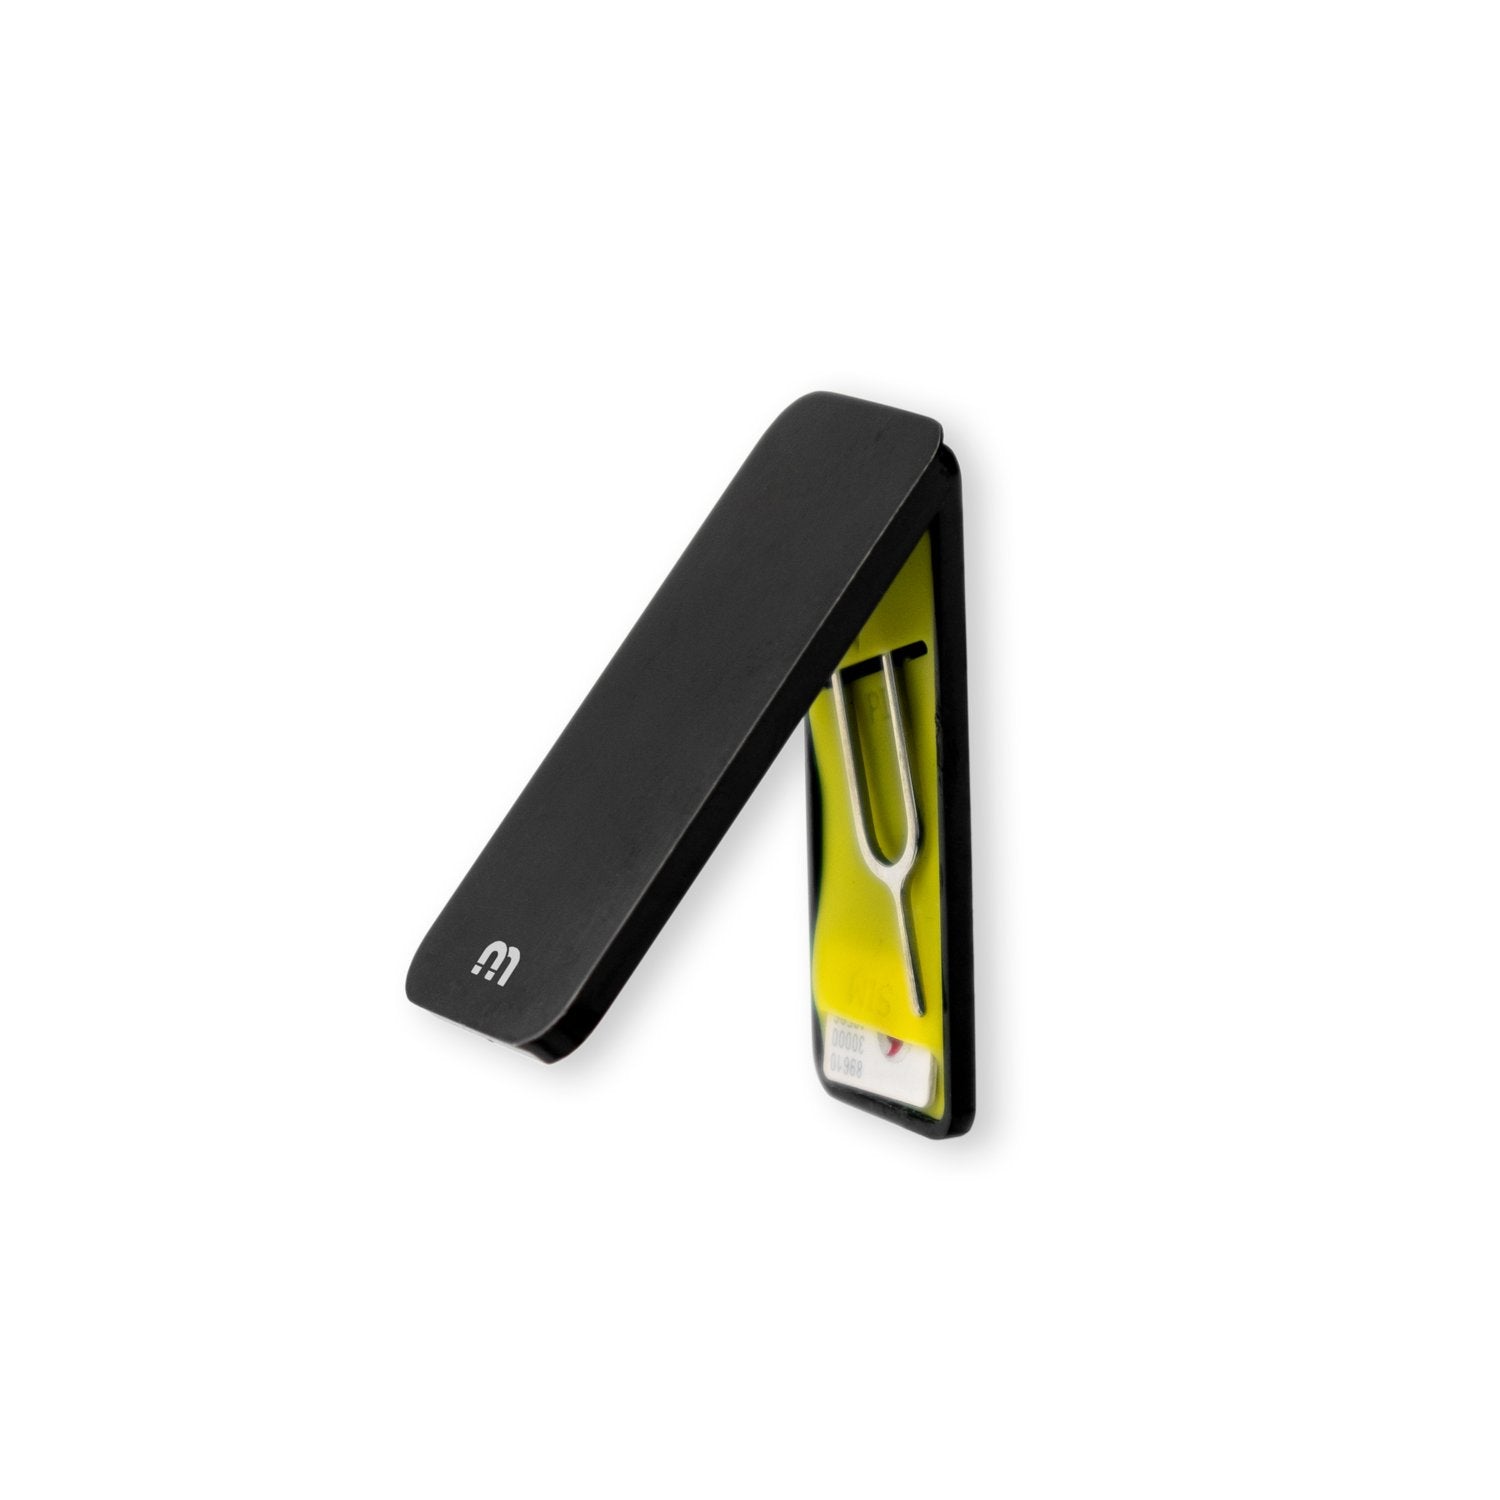 WING slimmest phone stand - HelloMaco - Storming Gravity